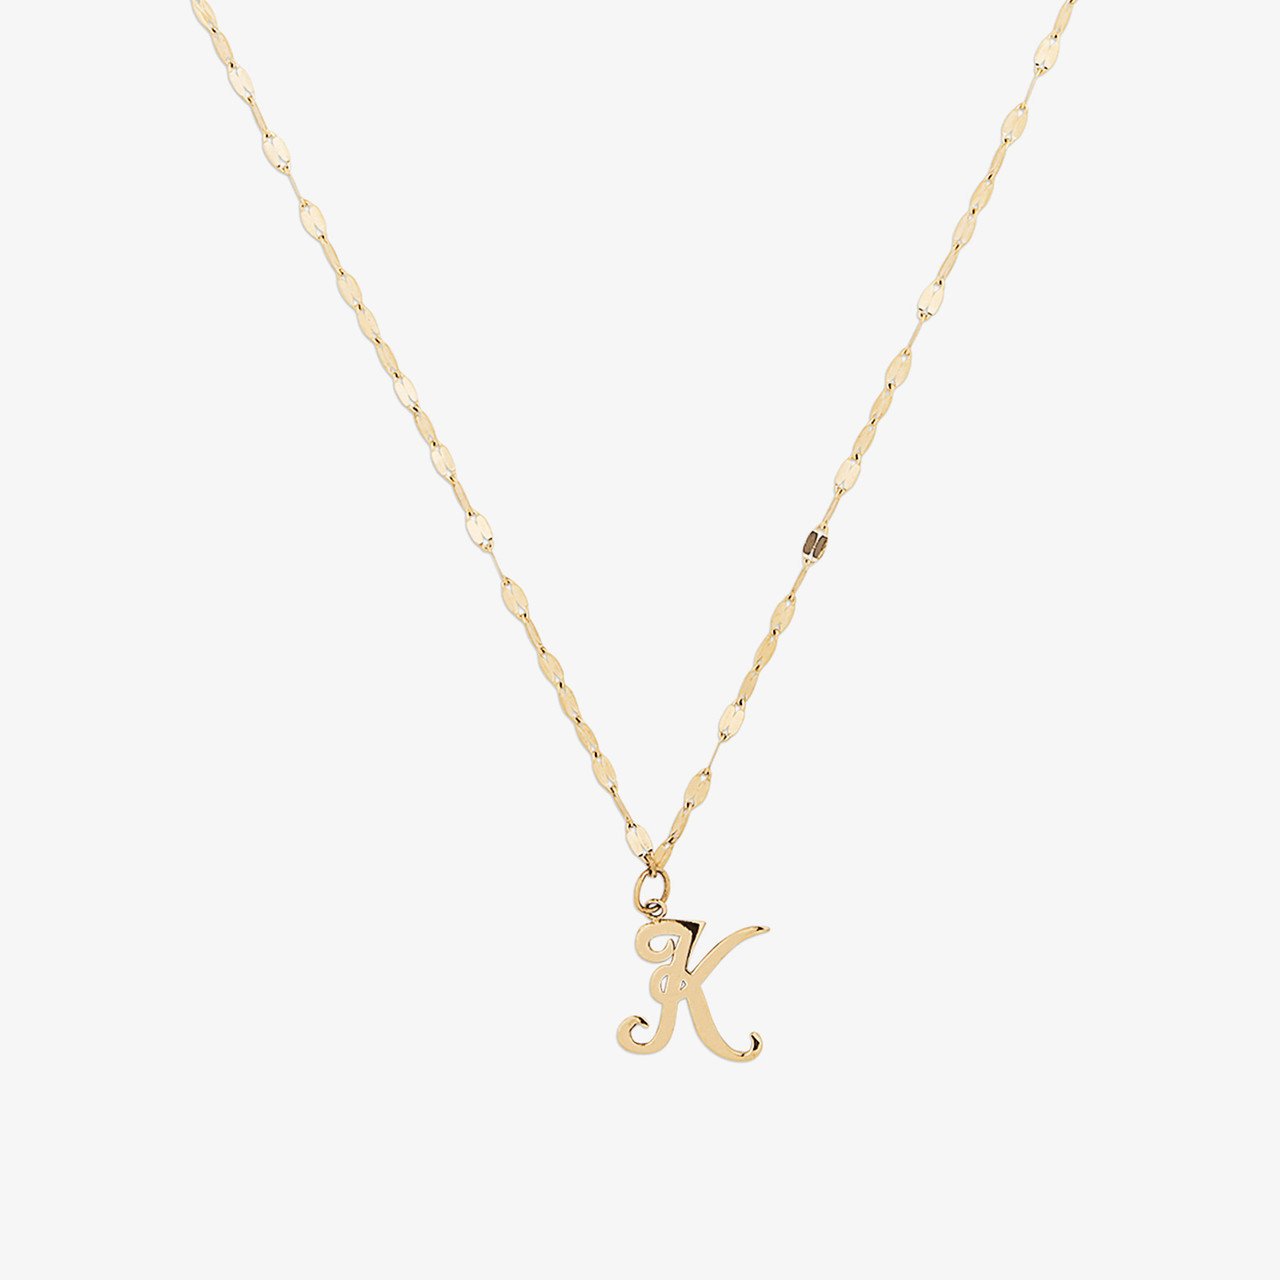 Initial Pendant R Letter Charms Diamond Necklace 14K Gold-G,I1 18 Chain / White Gold